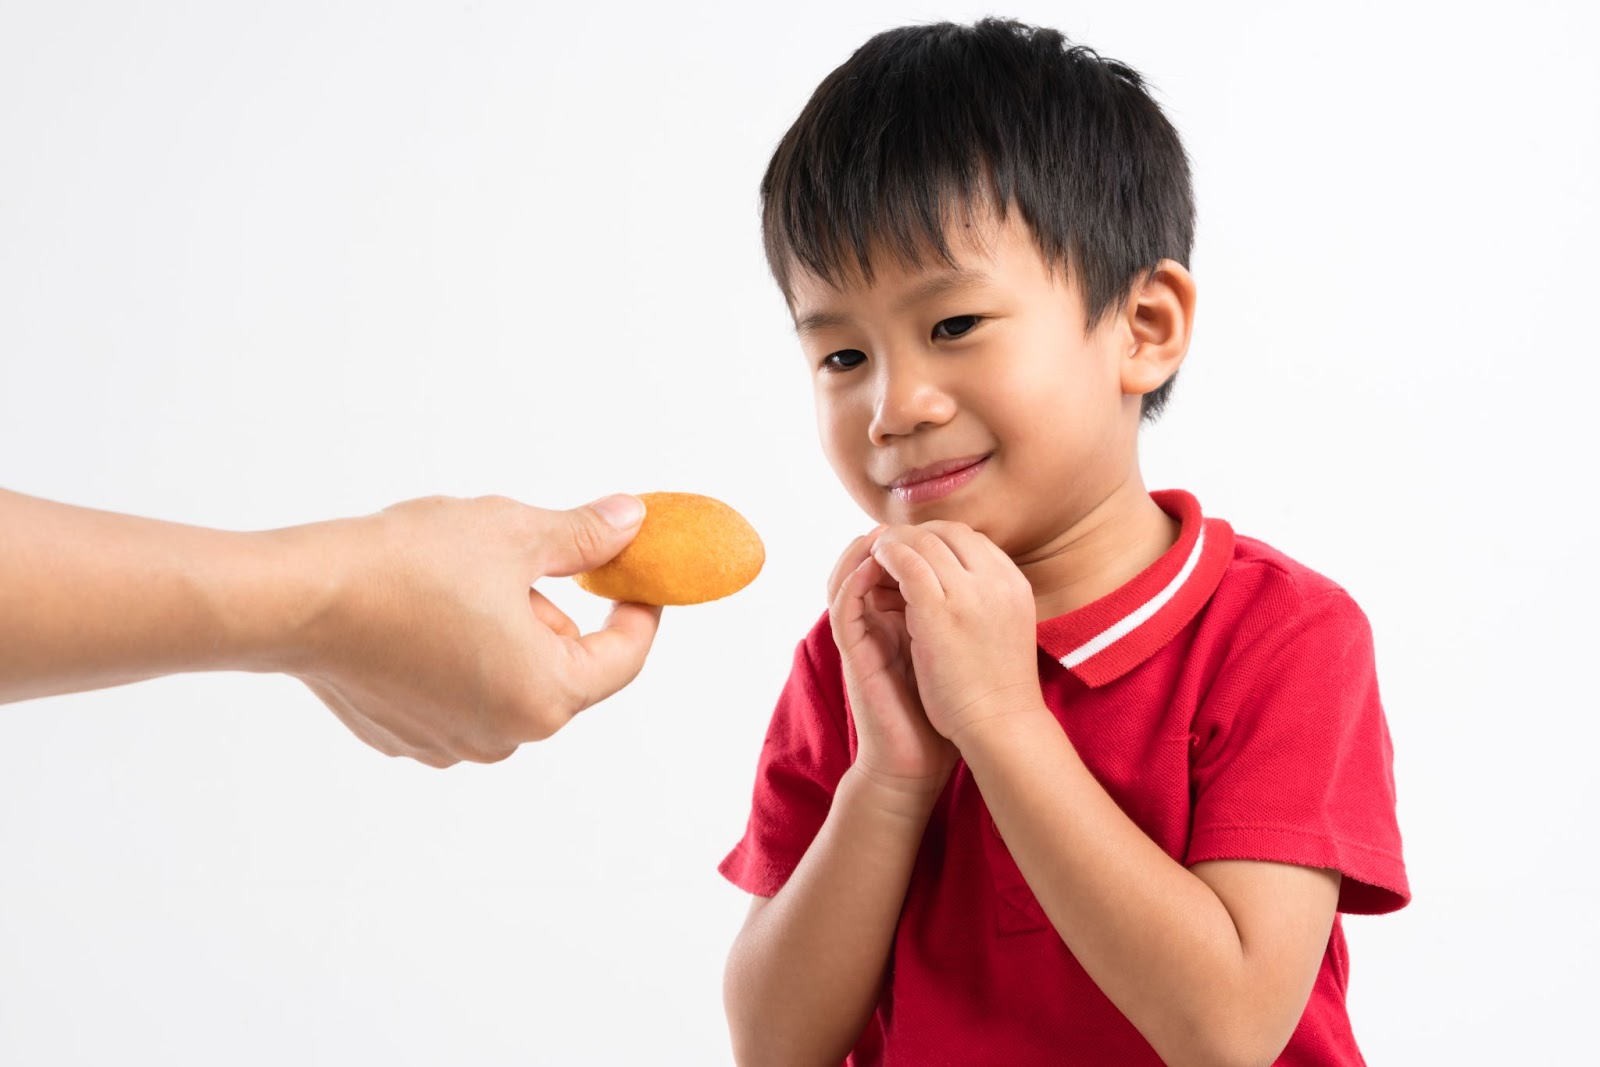 A female hand is giving a snack to Asian kid with the red shirt.